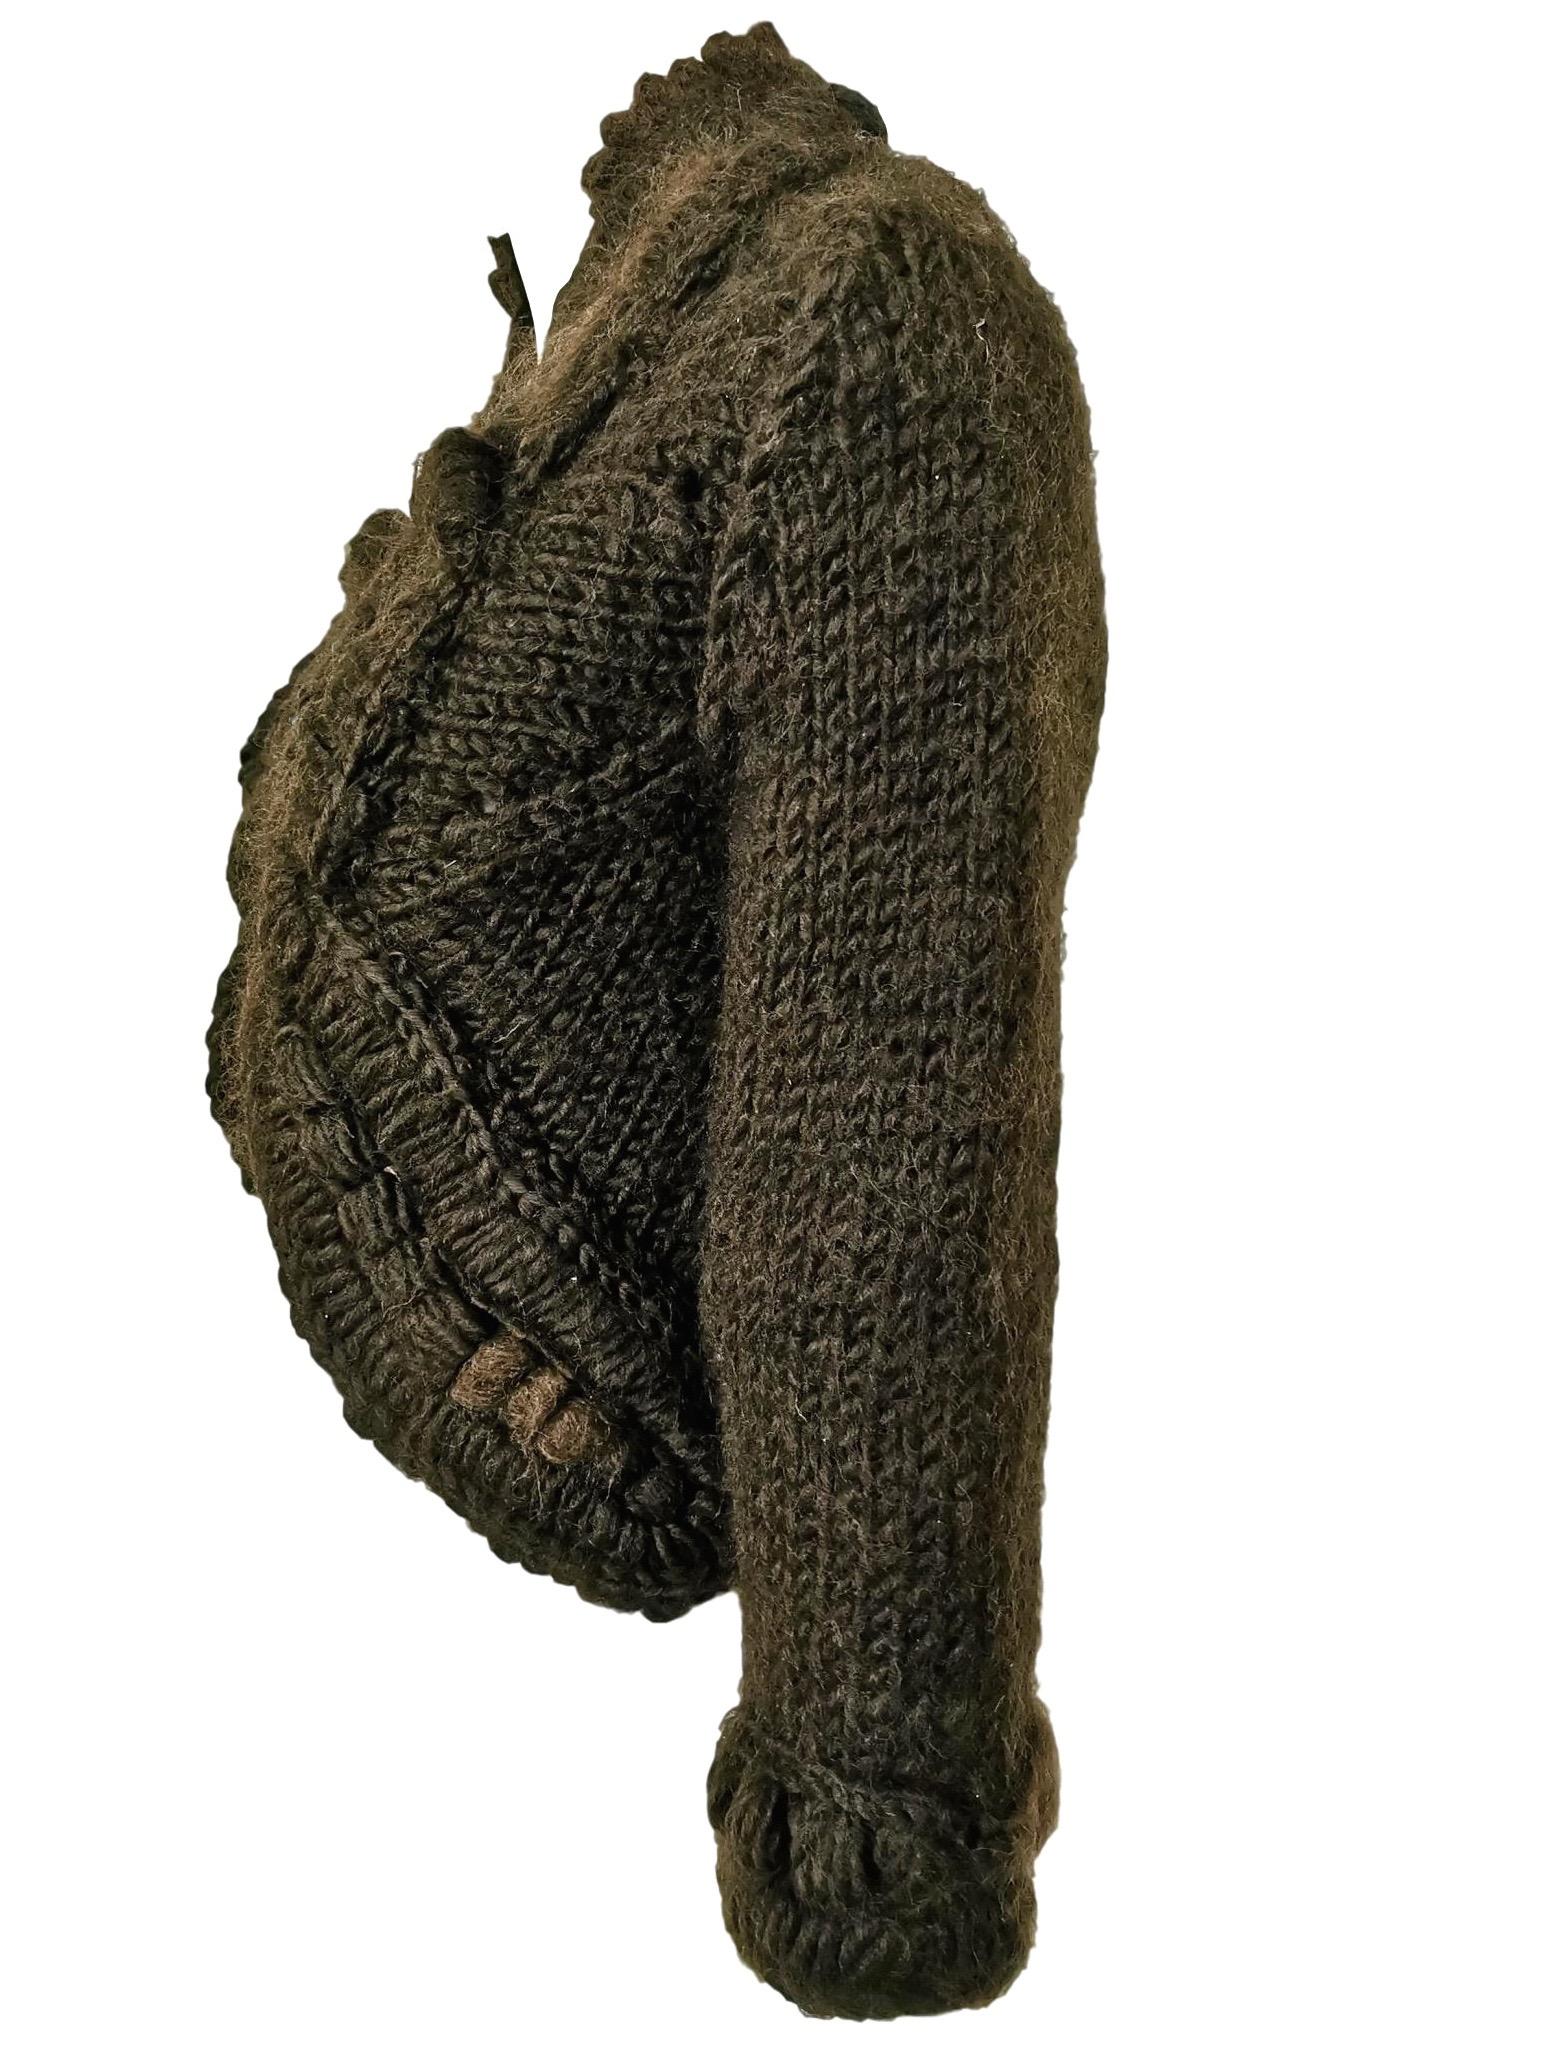 Comme des Garcons Tricot Handknit Autumnal Cardigan 2005 In Good Condition For Sale In Bath, GB